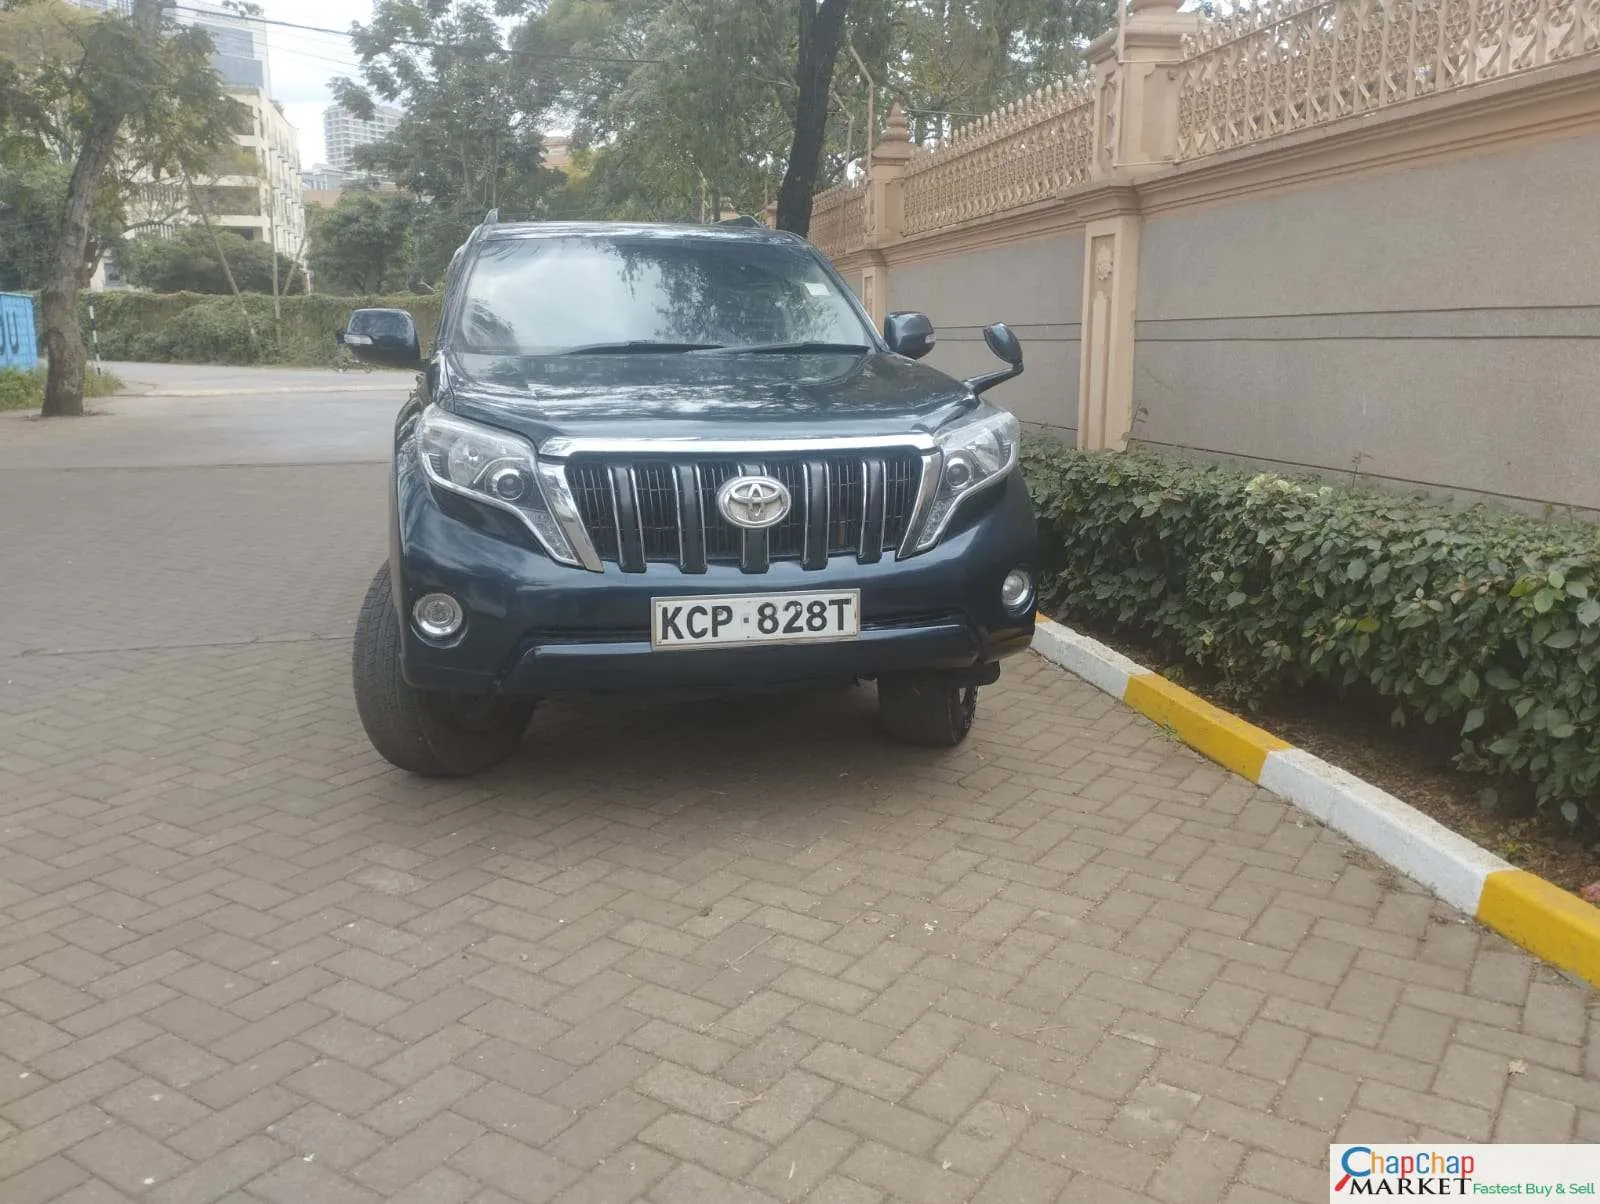 Toyota Prado j150 for sale in Kenya QUICK SALE You Pay 30% Deposit Trade in OK EXCLUSIVE